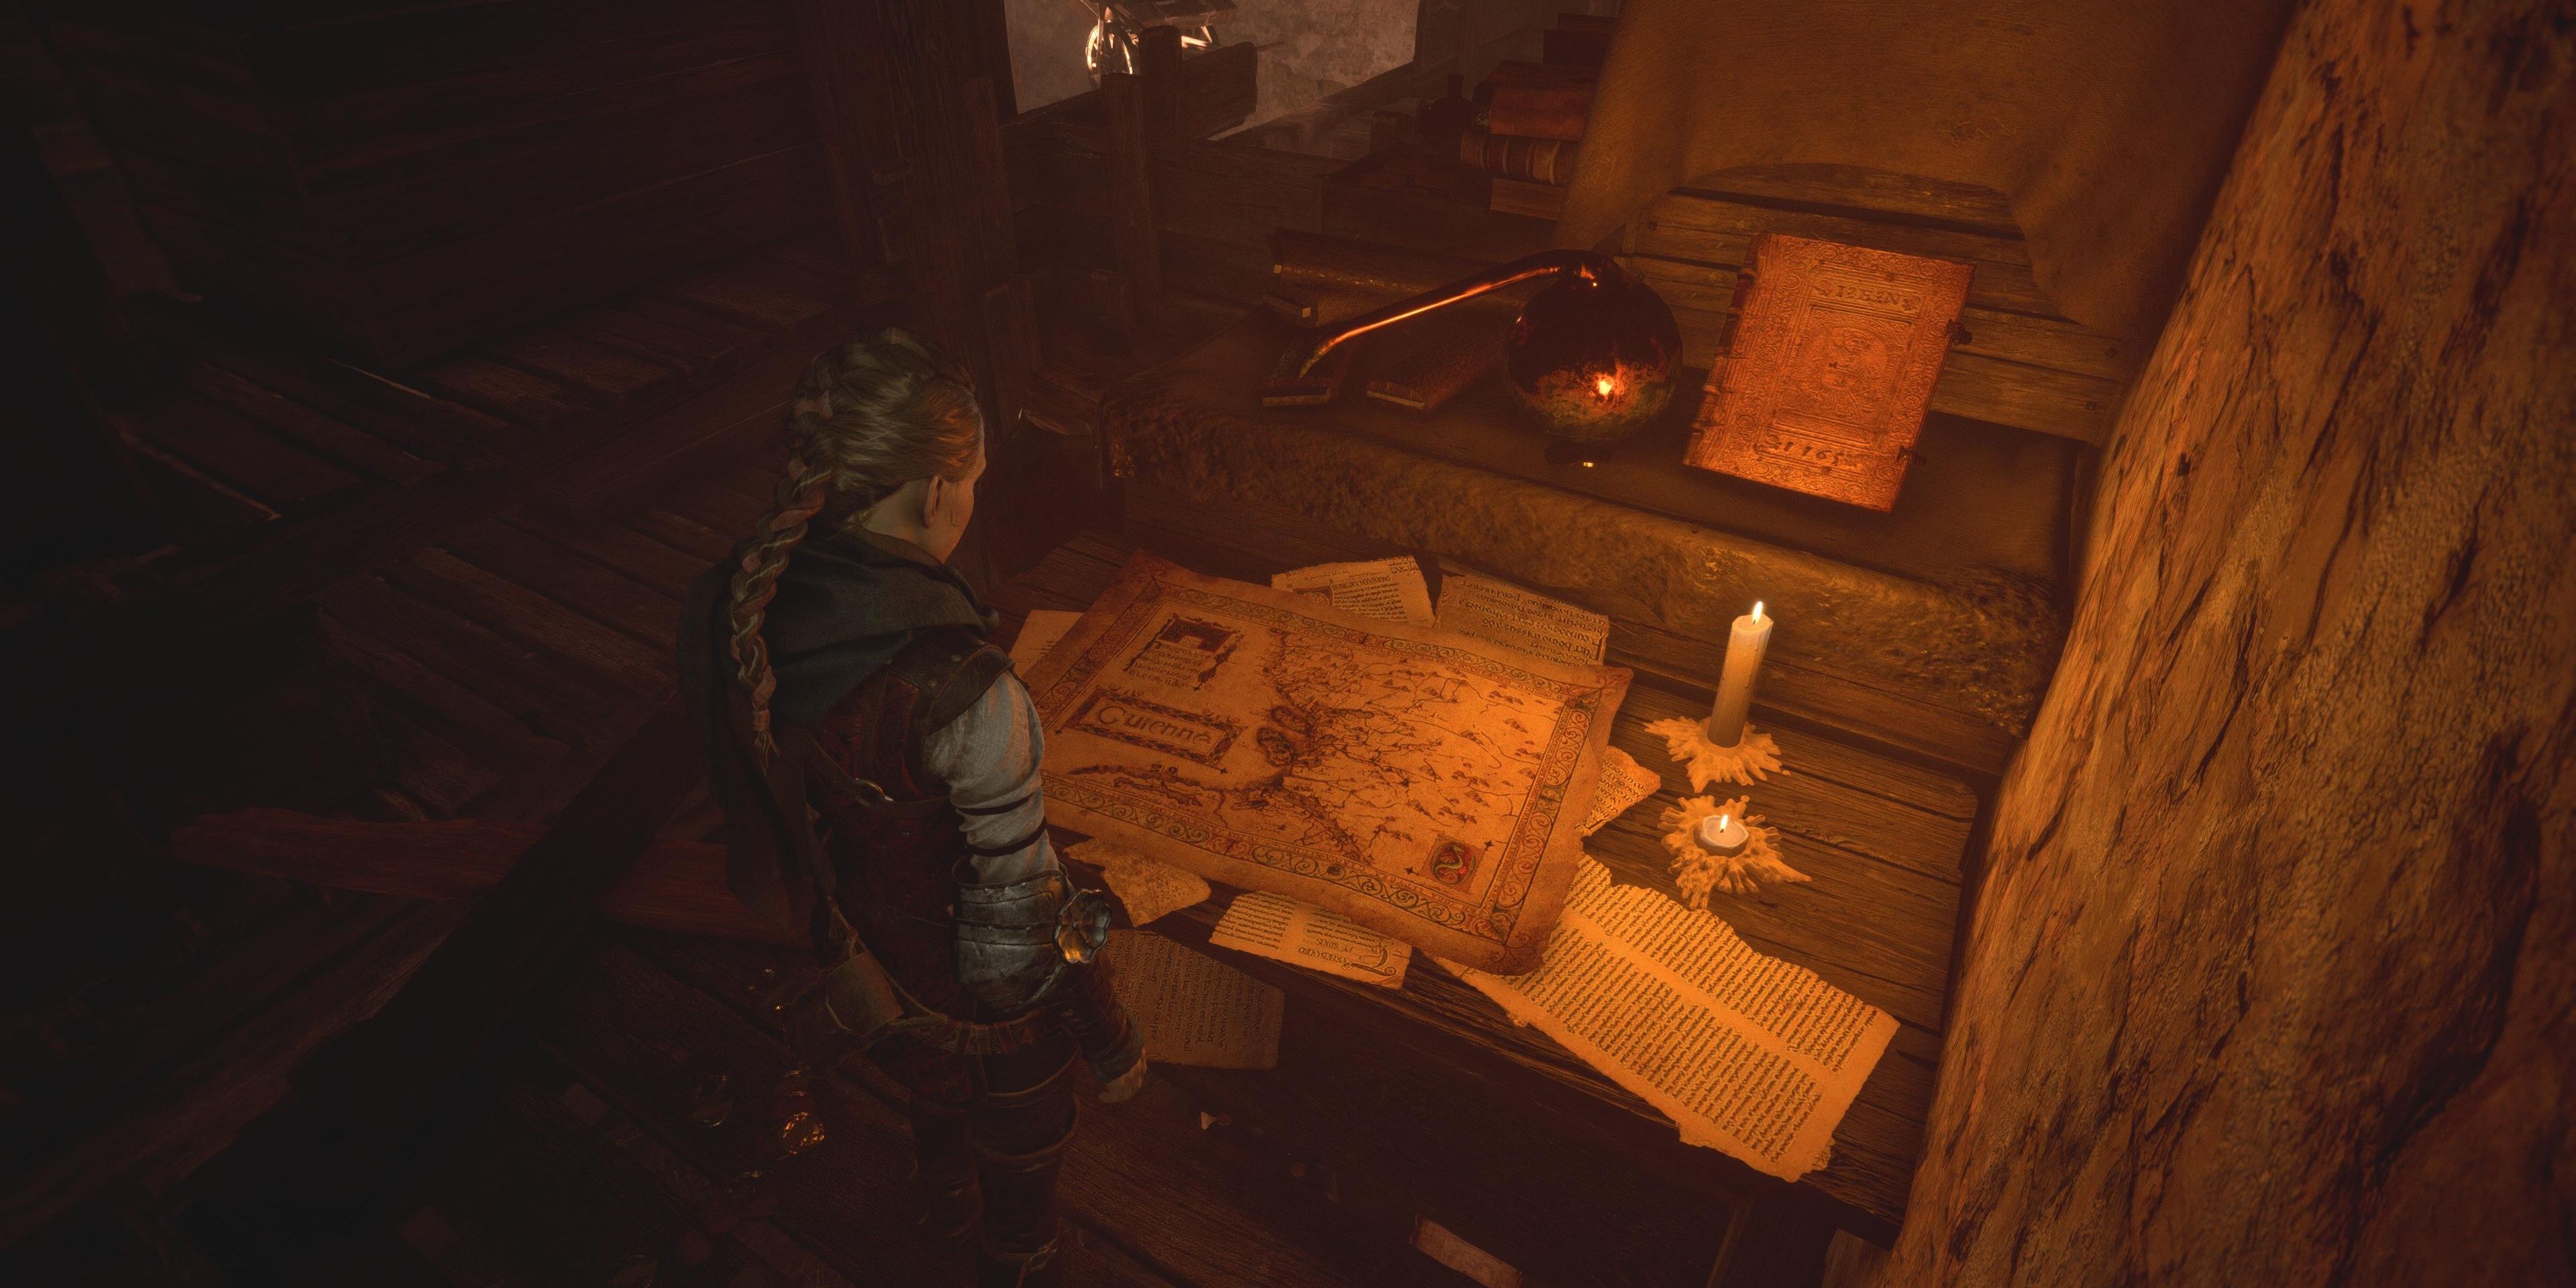 amicia finding map of Guyenne